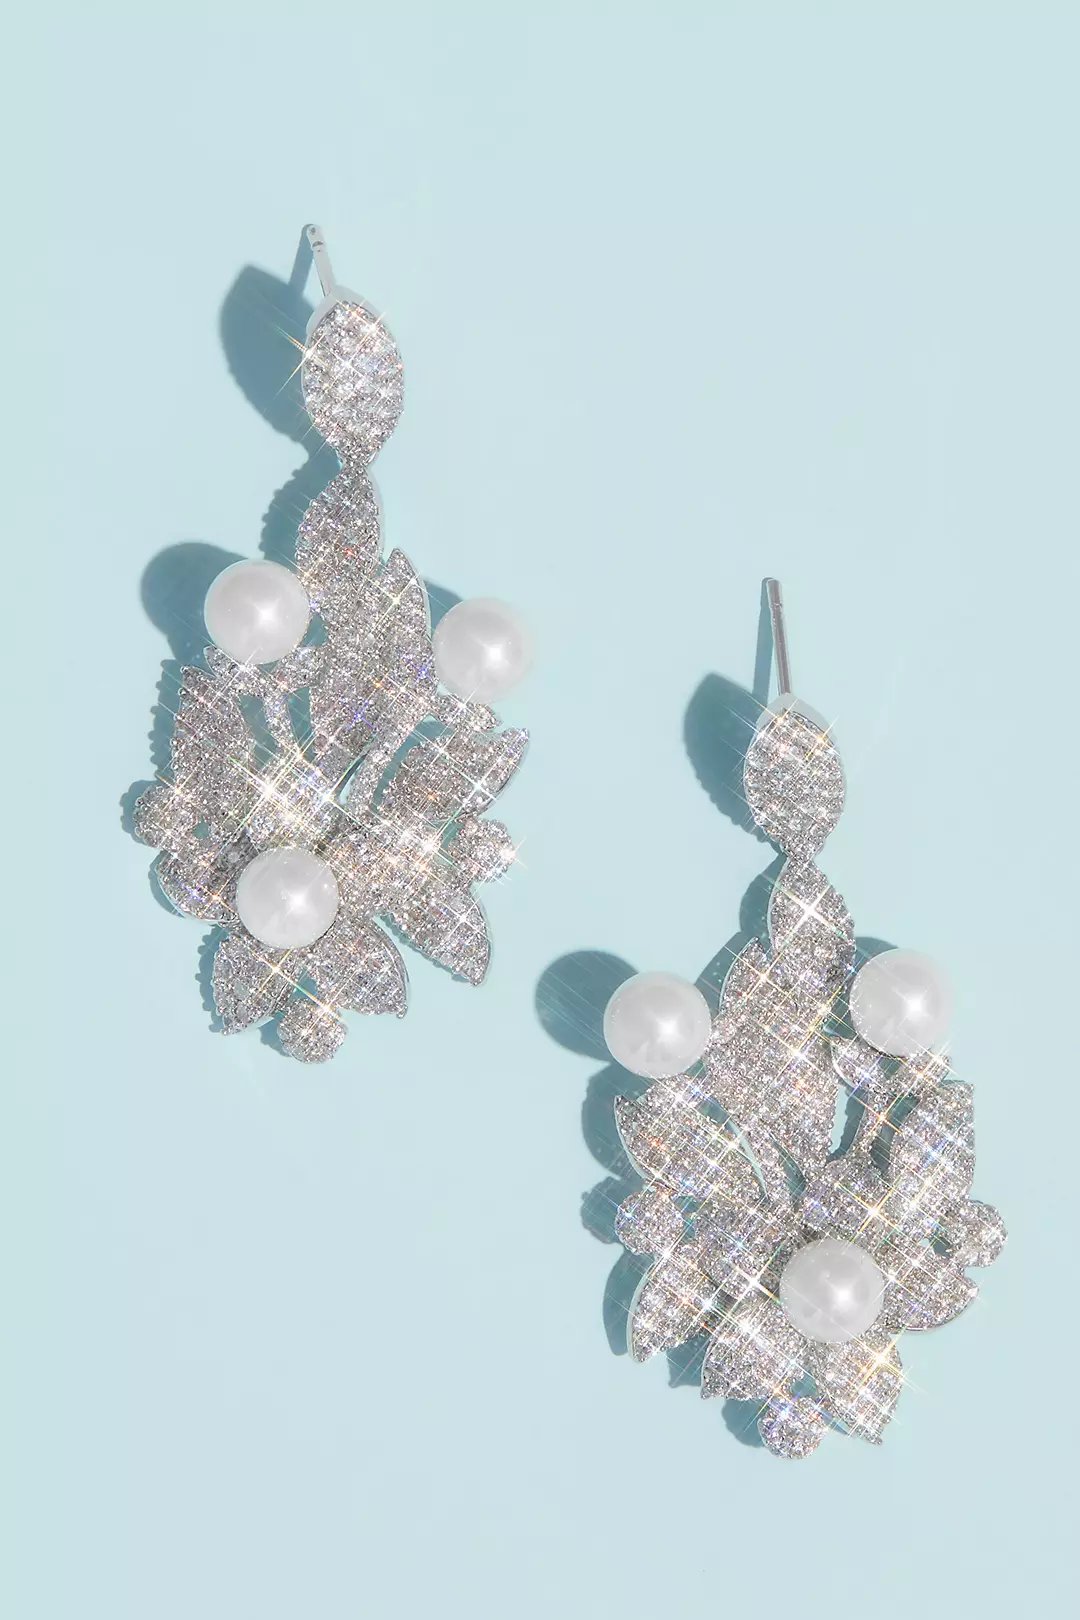 Crystal Floral Earrings with Pearl Embellishments Image